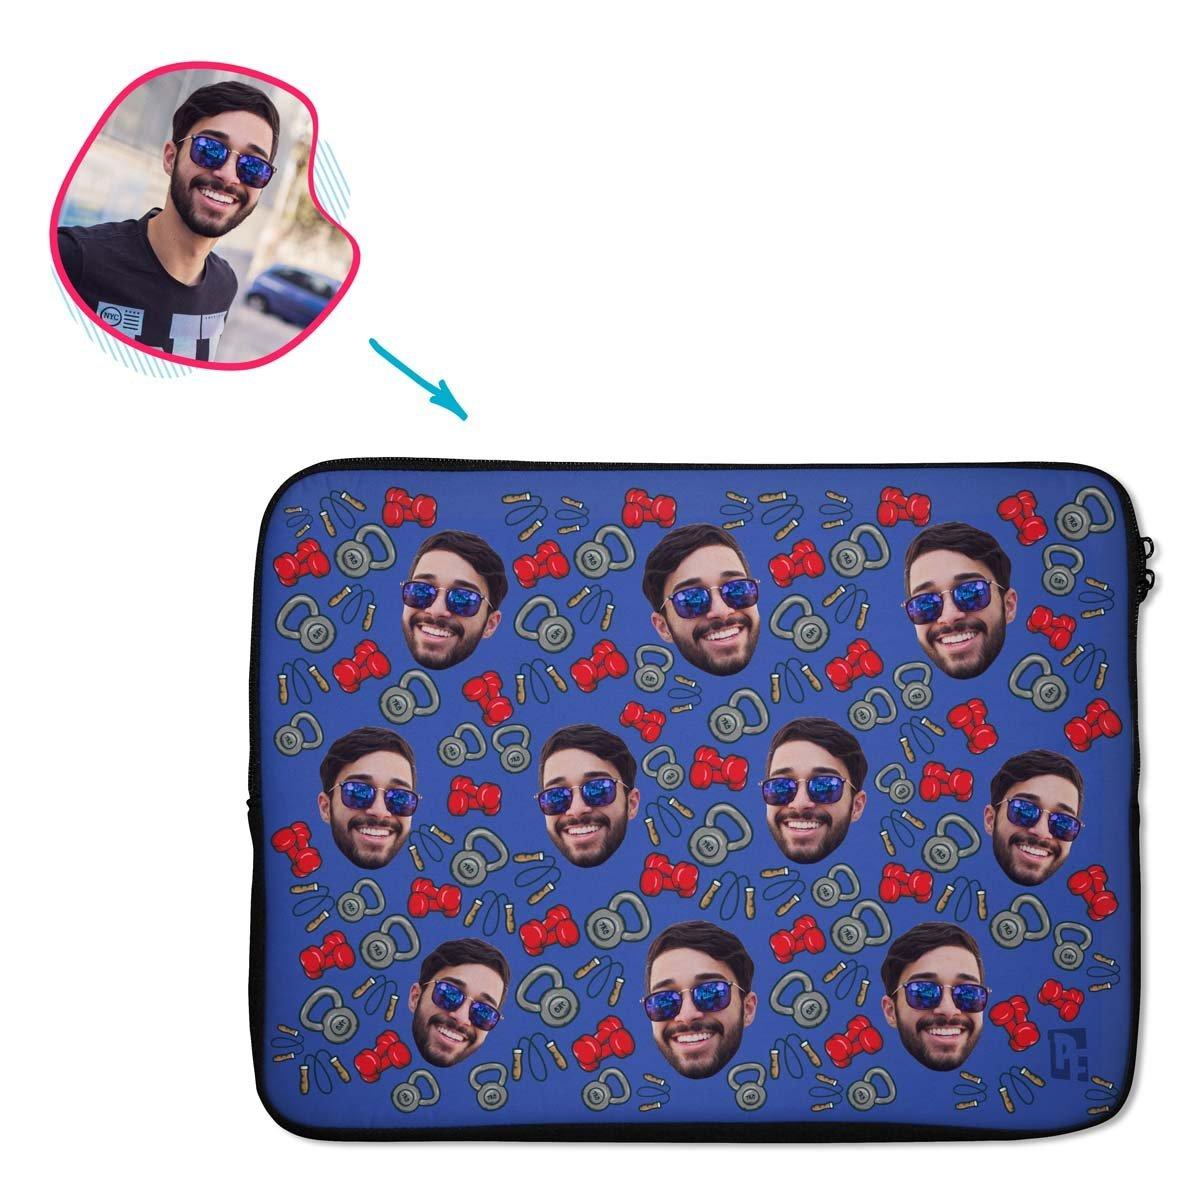 darkblue Gym & Fitness laptop sleeve personalized with photo of face printed on them